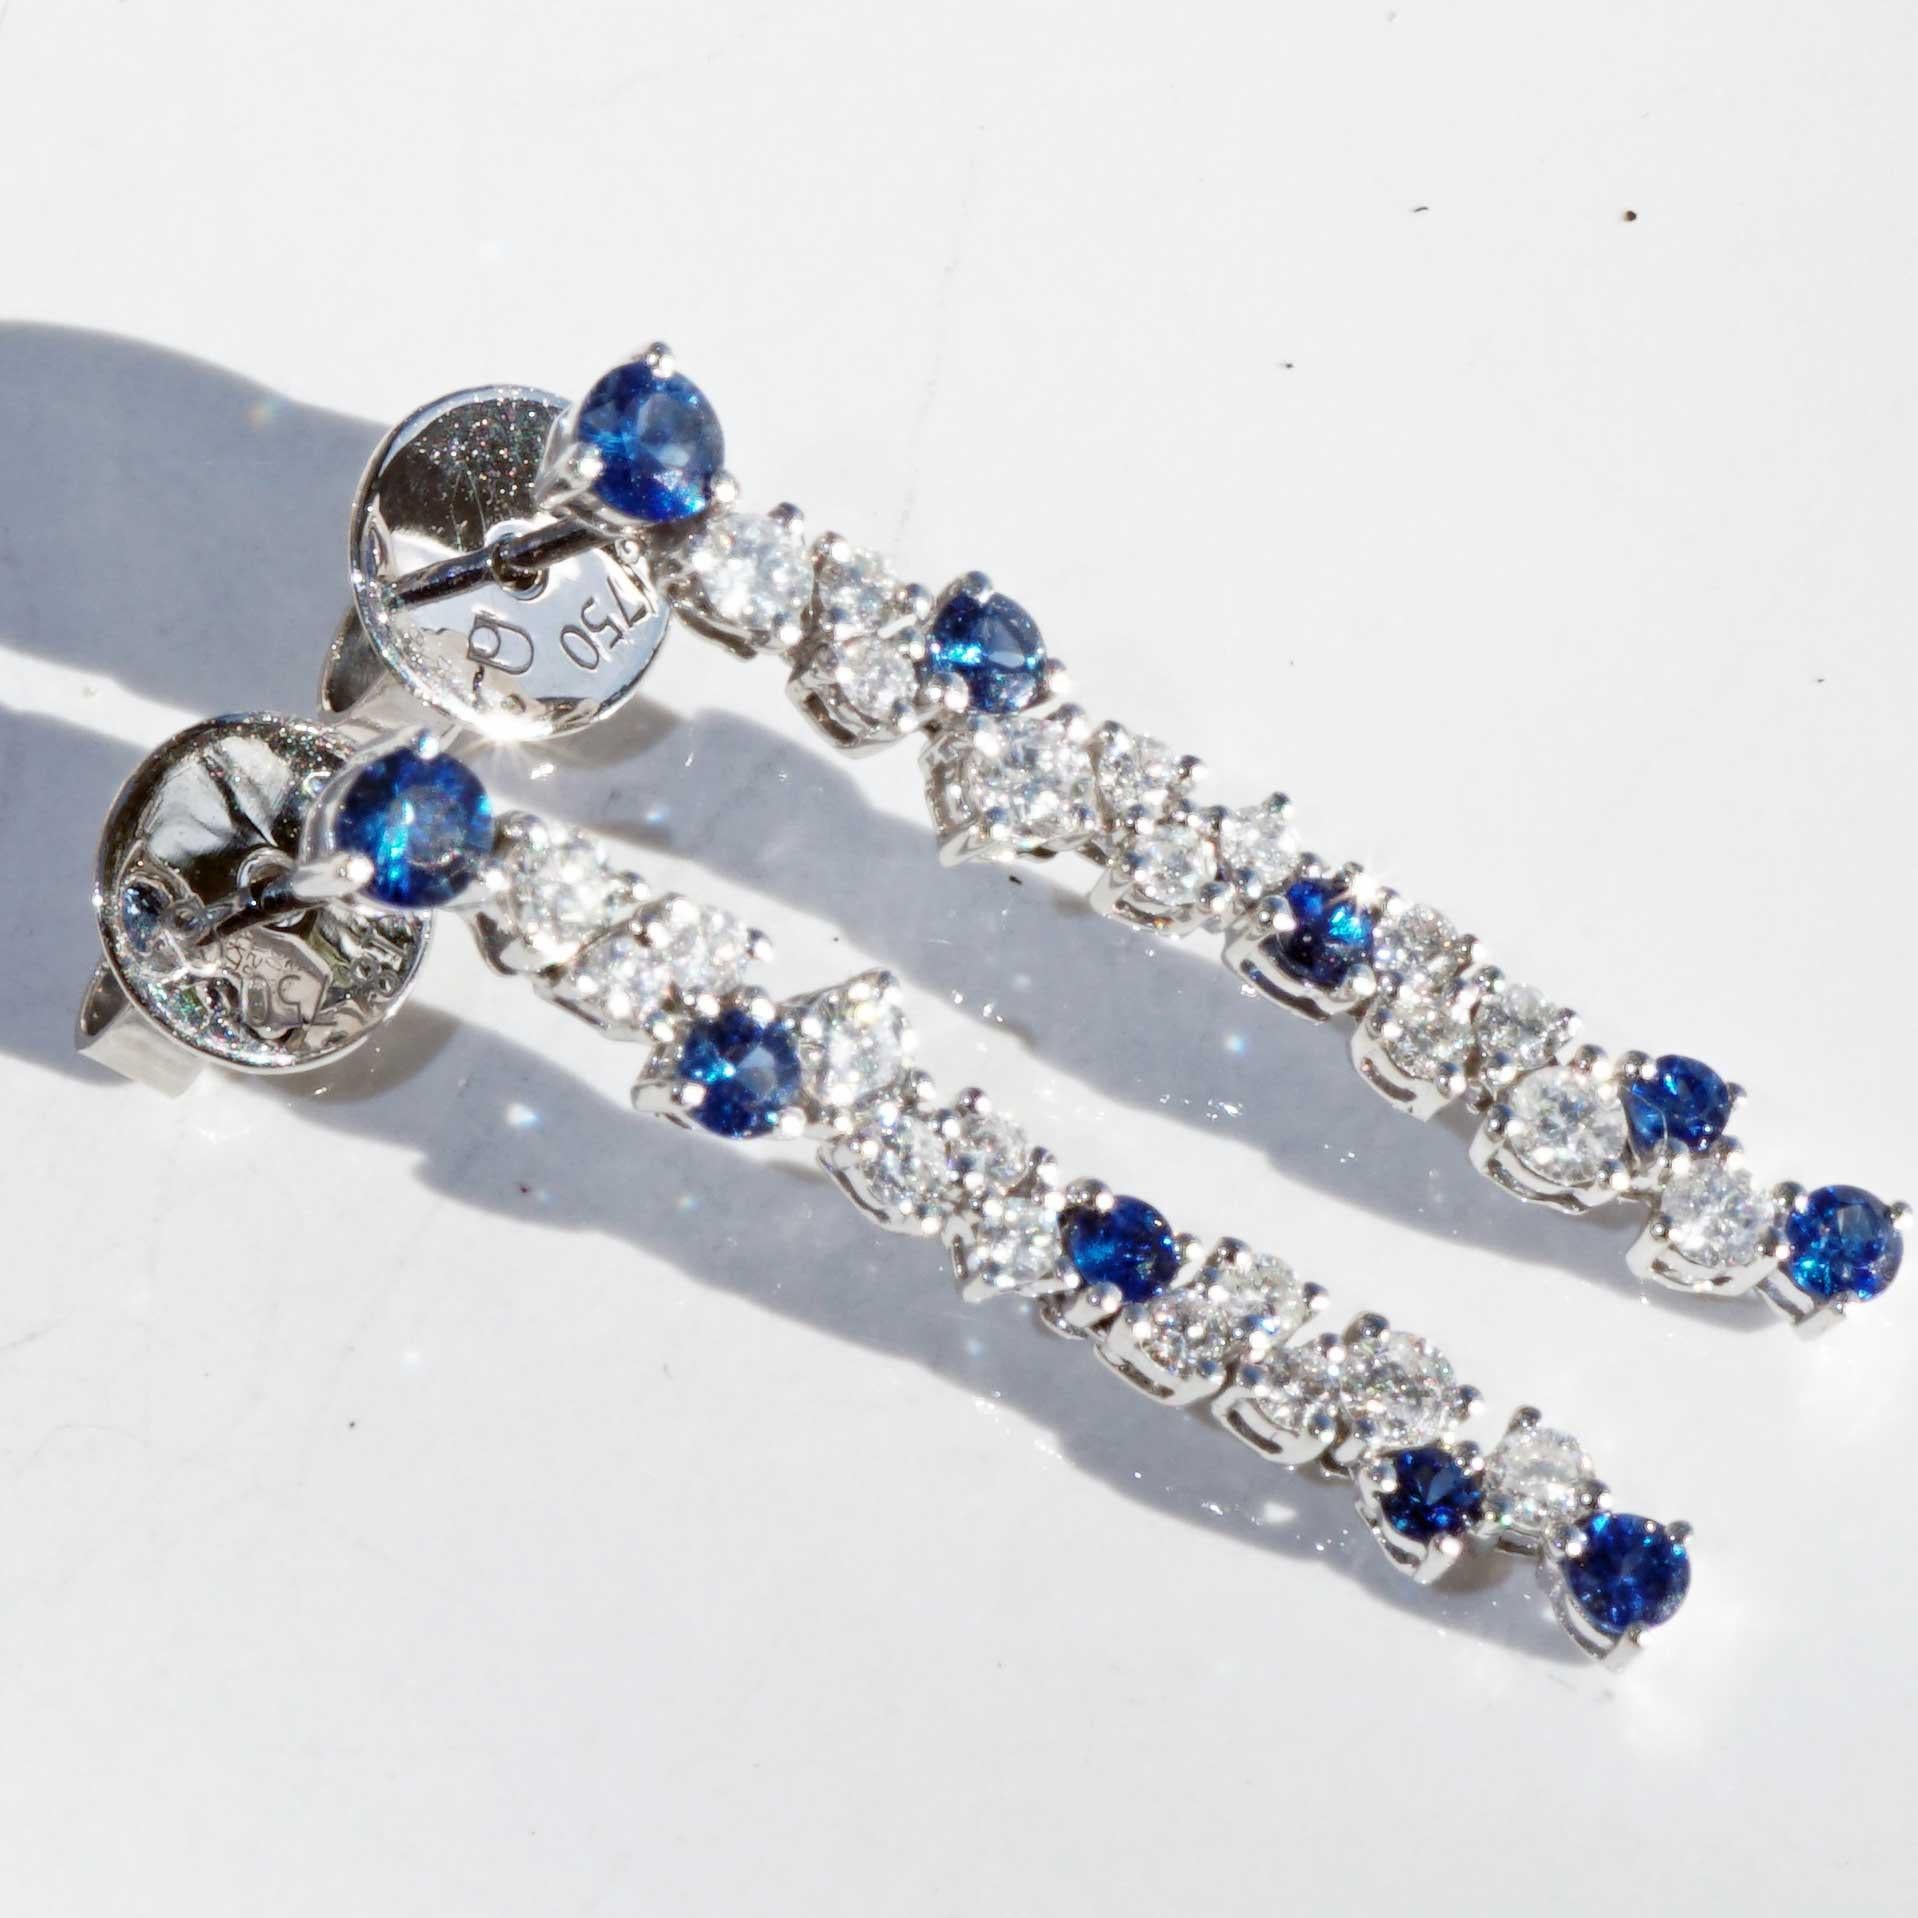 Modern Saphire Brilliant Earrings for a glorious Appearance 0.50 ct 0.56 ct 27 x 4 mm